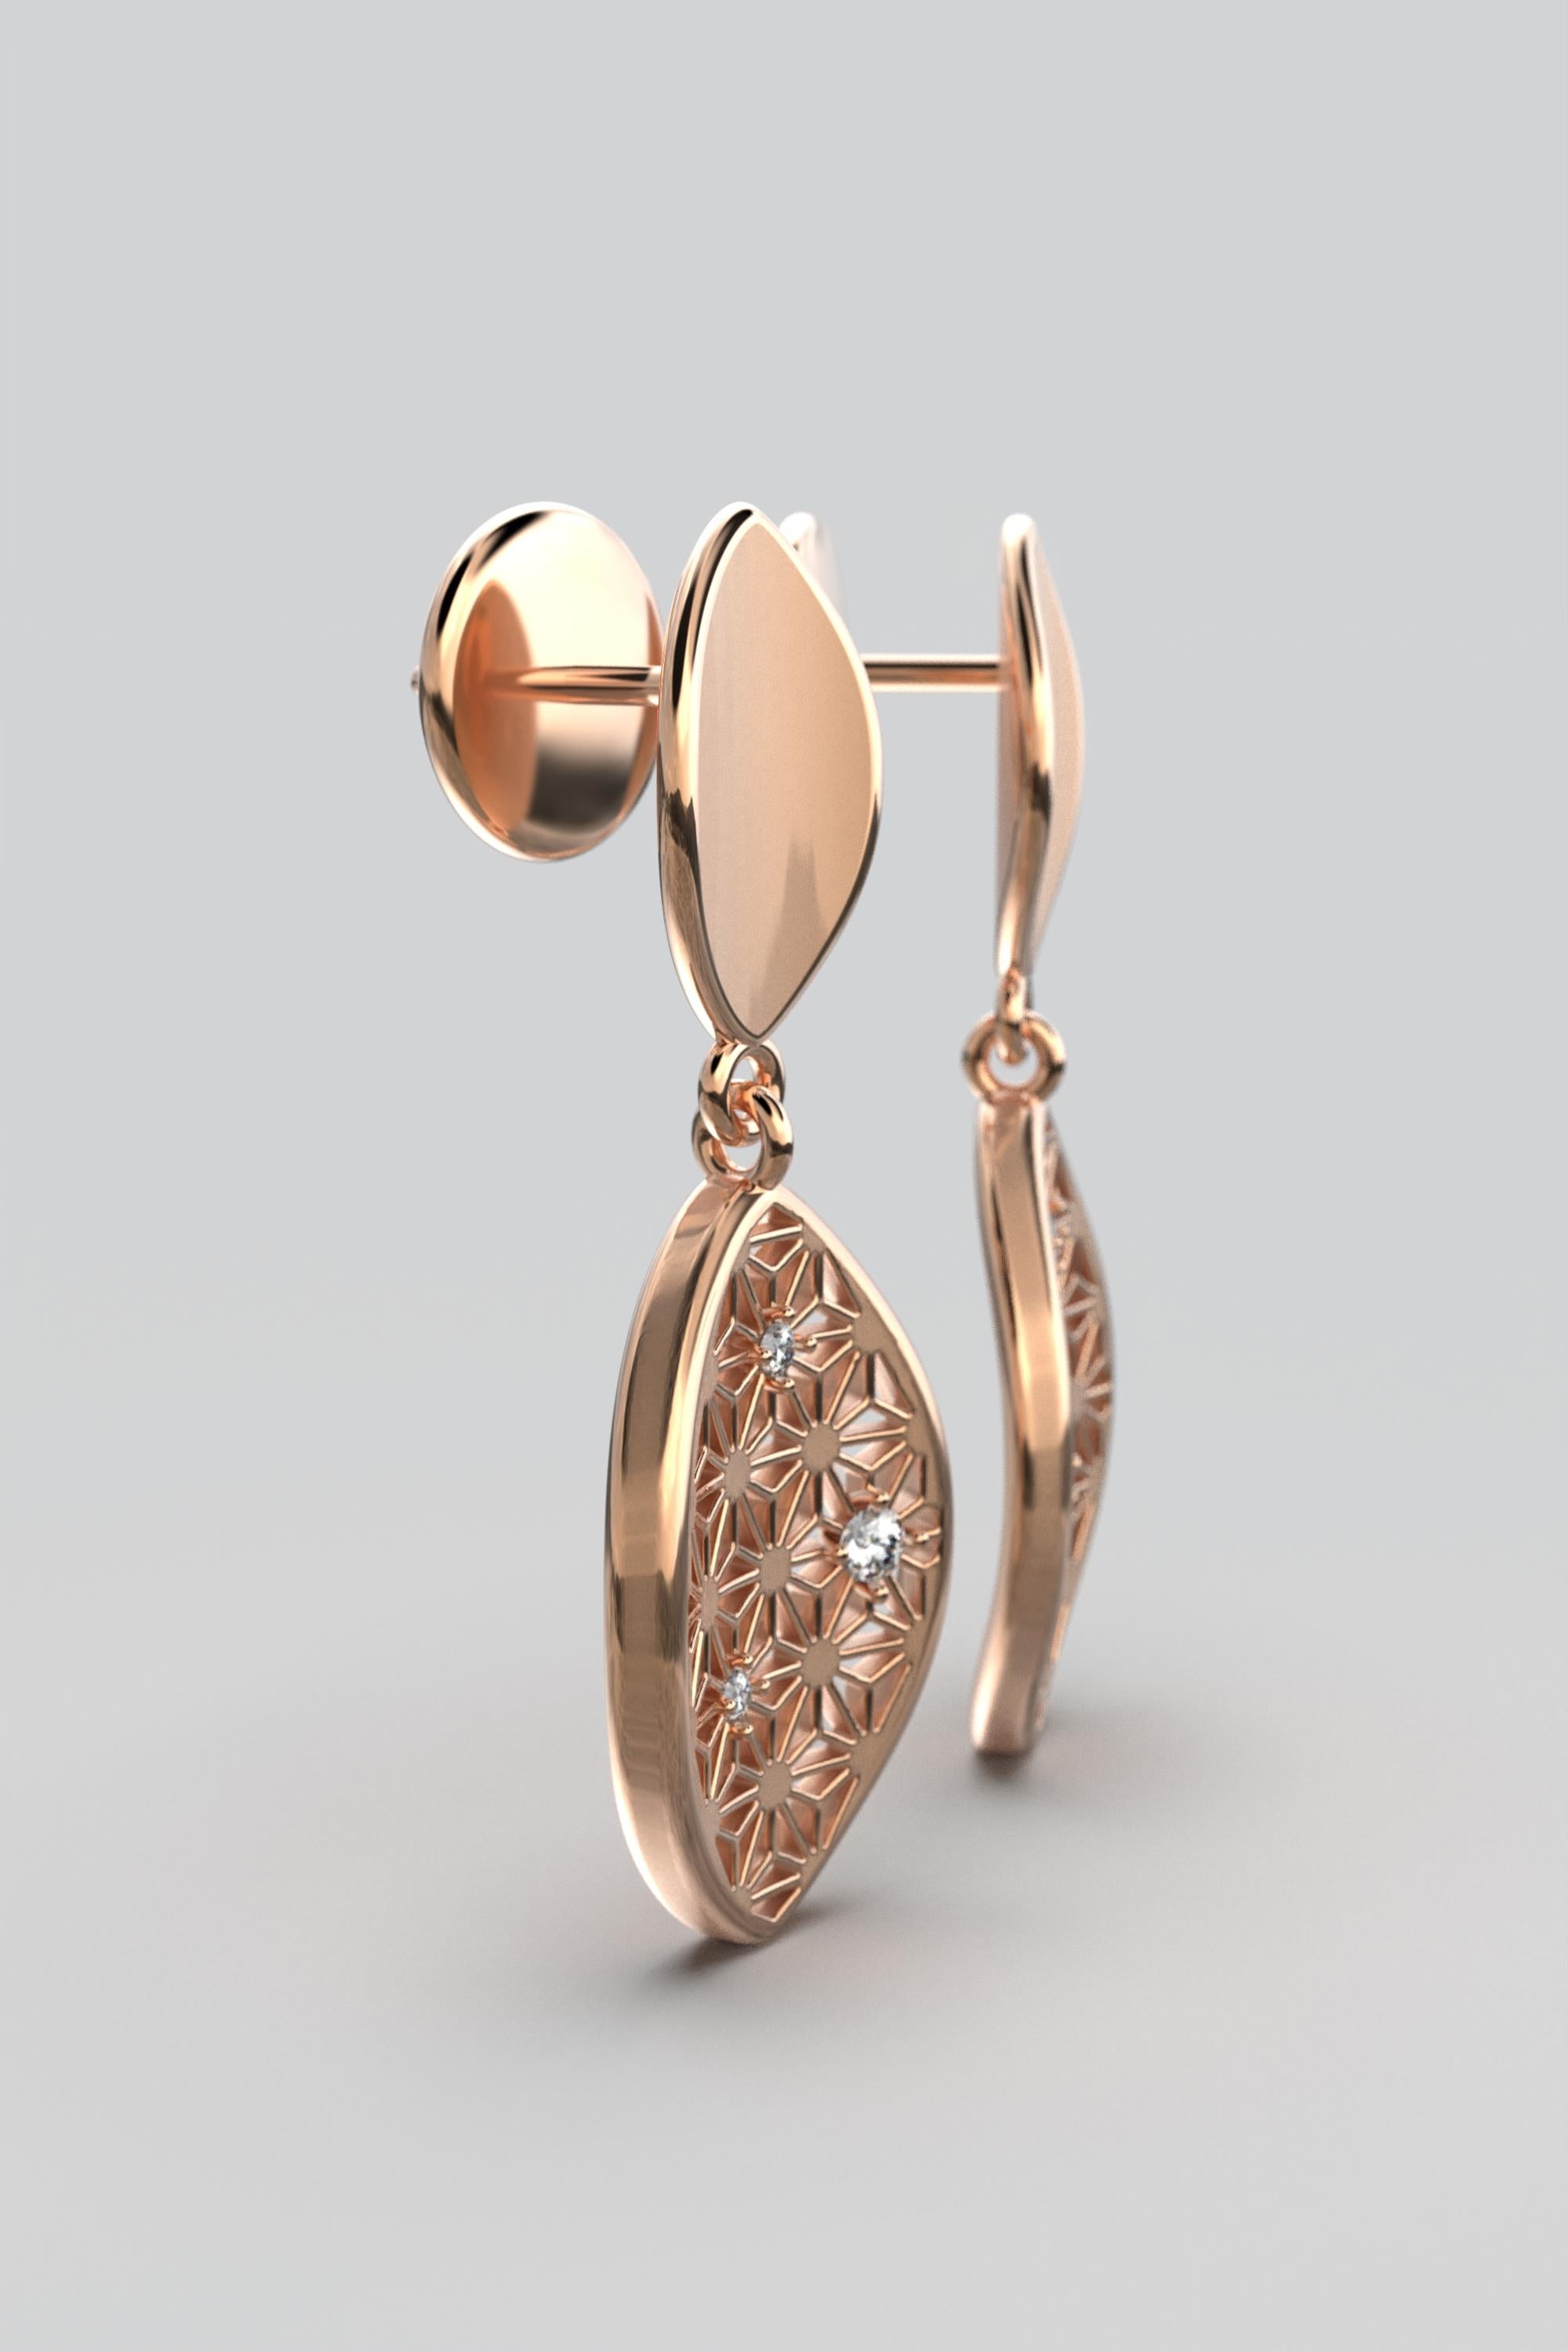 Italian Diamond Earrings in 18k Solid Gold with Japanese Sashiko Pattern For Sale 3